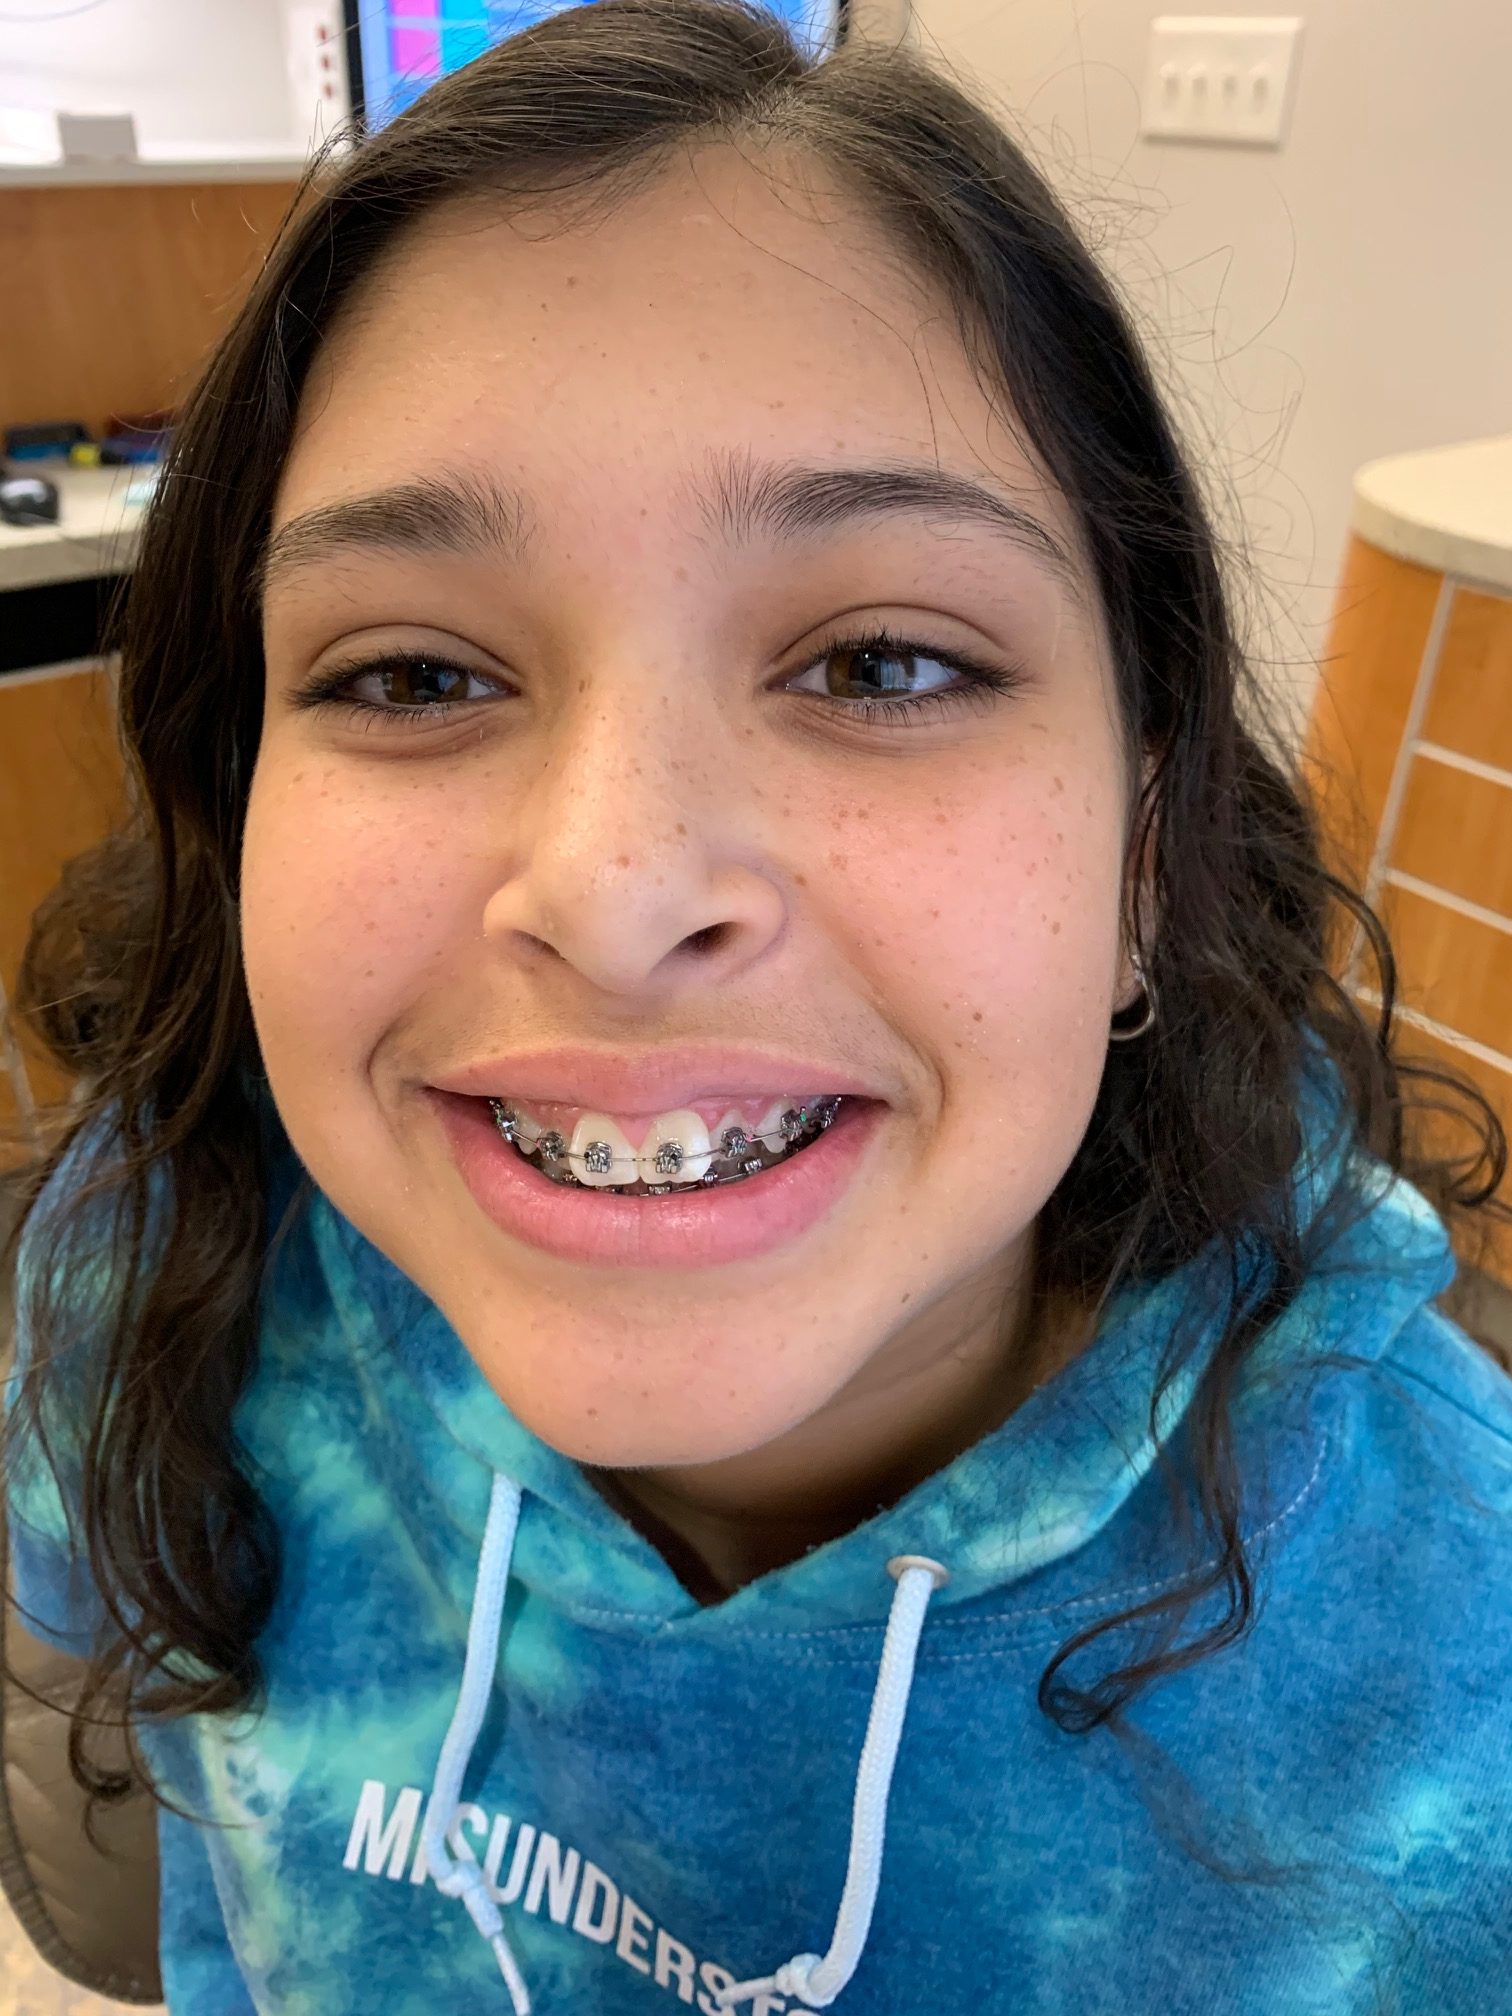 How Much Do Teeth Braces Cost with Insurance?